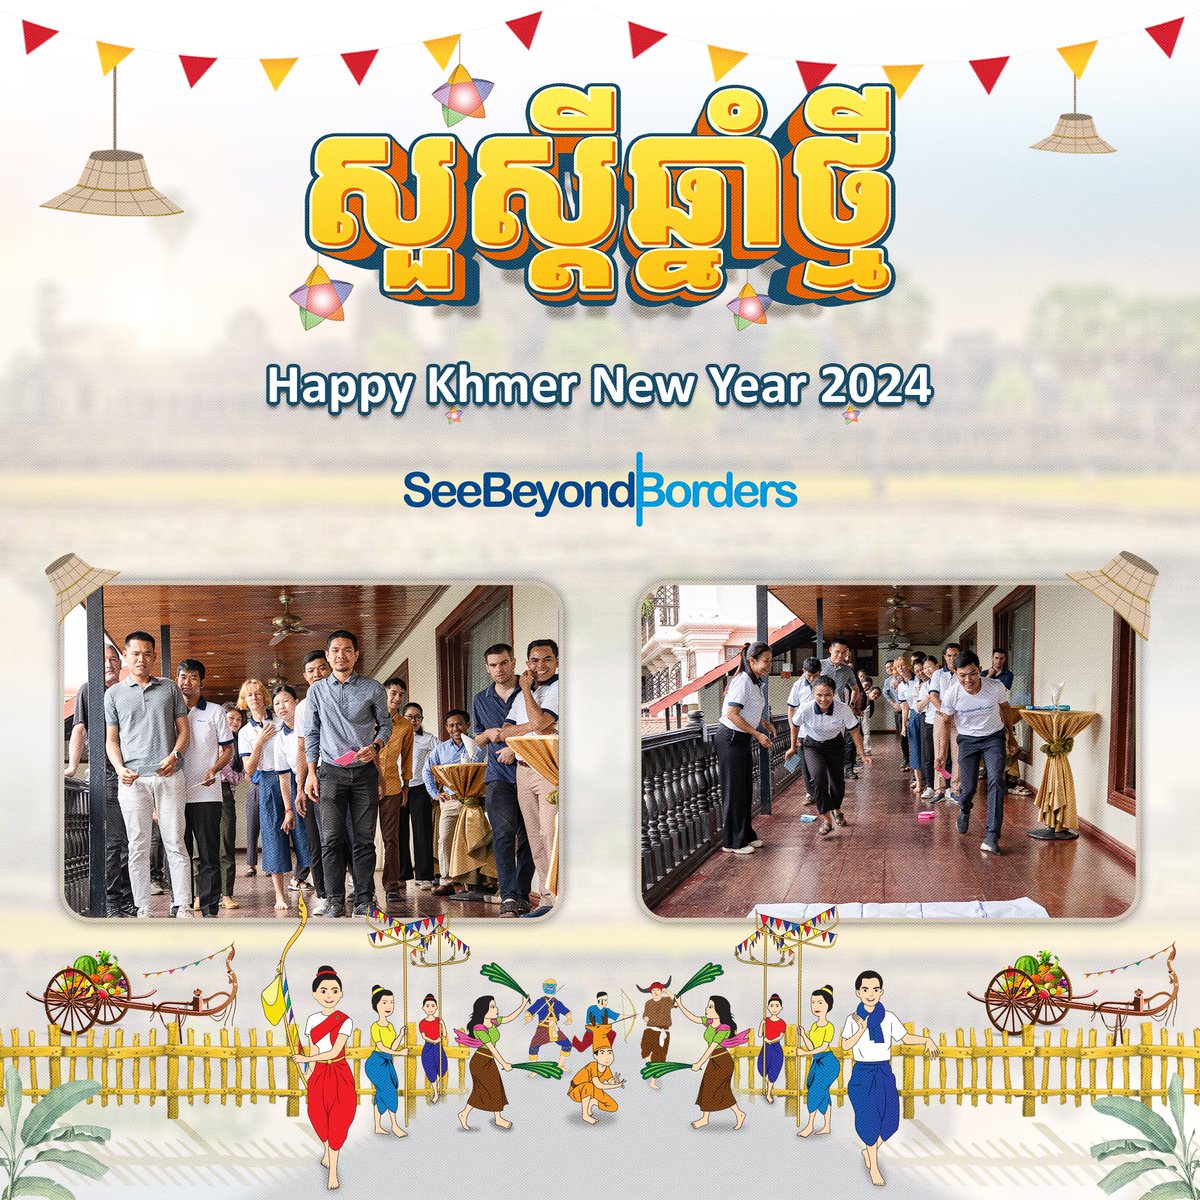 Happy Khmer New Year! Our offices in Cambodia will be closed for a week to celebrate Khmer New Year. We wish everyone in Cambodia and those celebrating around the world health, happiness, and safe travels during the New Year festivities. #KhmerNewYear2024